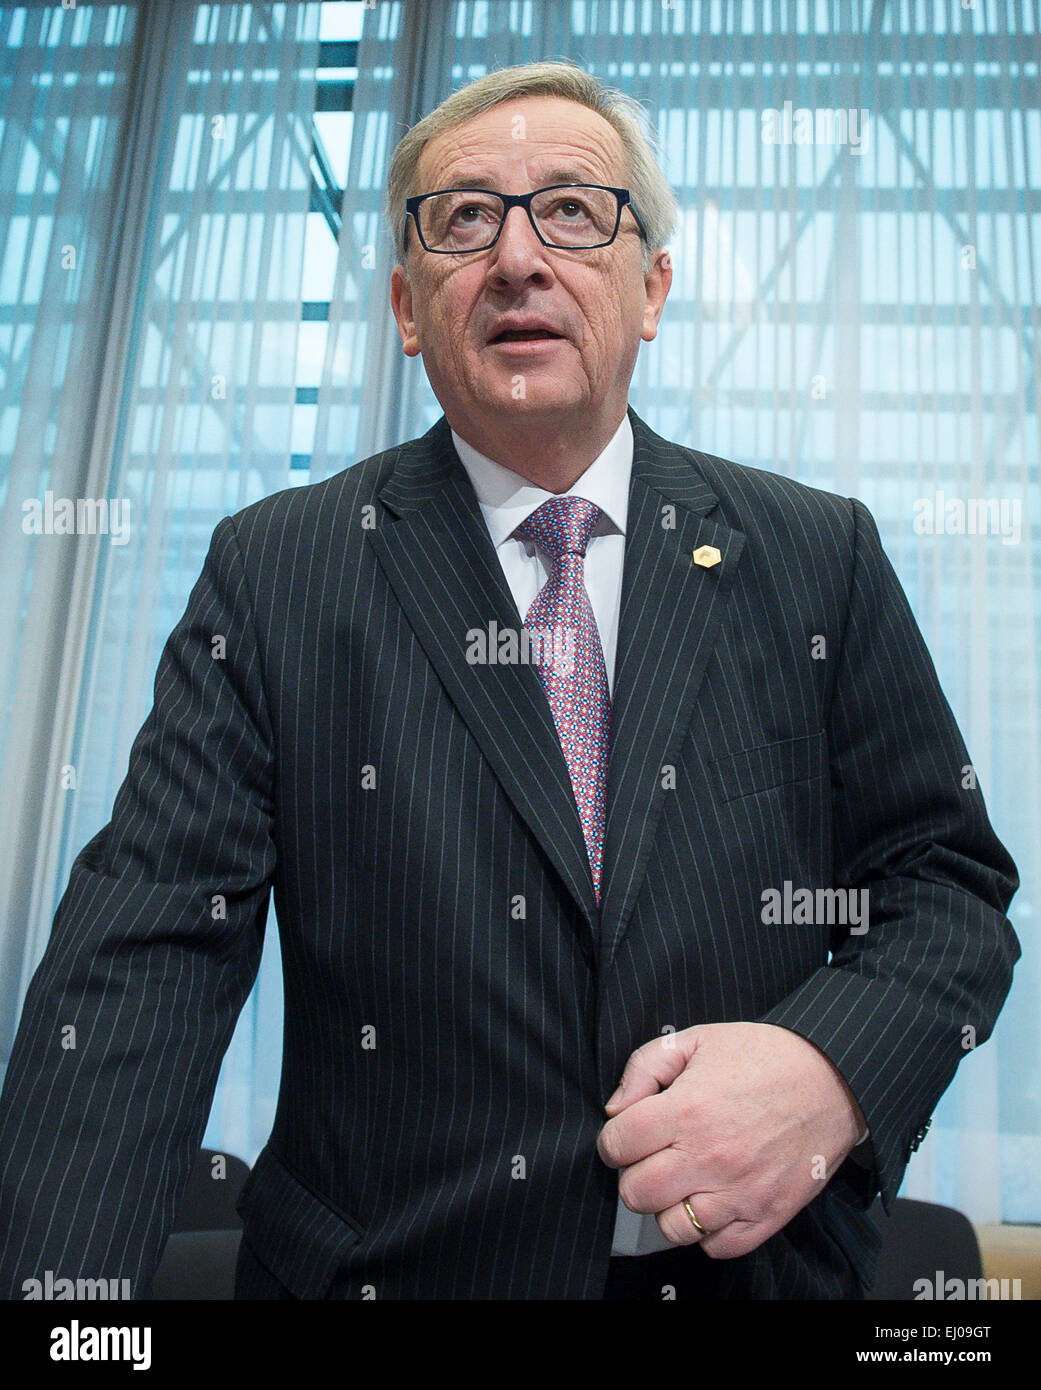 Jean-Claude Juncker, the president of the European Commission at the start of a Tripartite Social Summit ahead of the EU Summit in Brussels, Belgium on 19.03.2015 by Wiktor Dabkowski Stock Photo